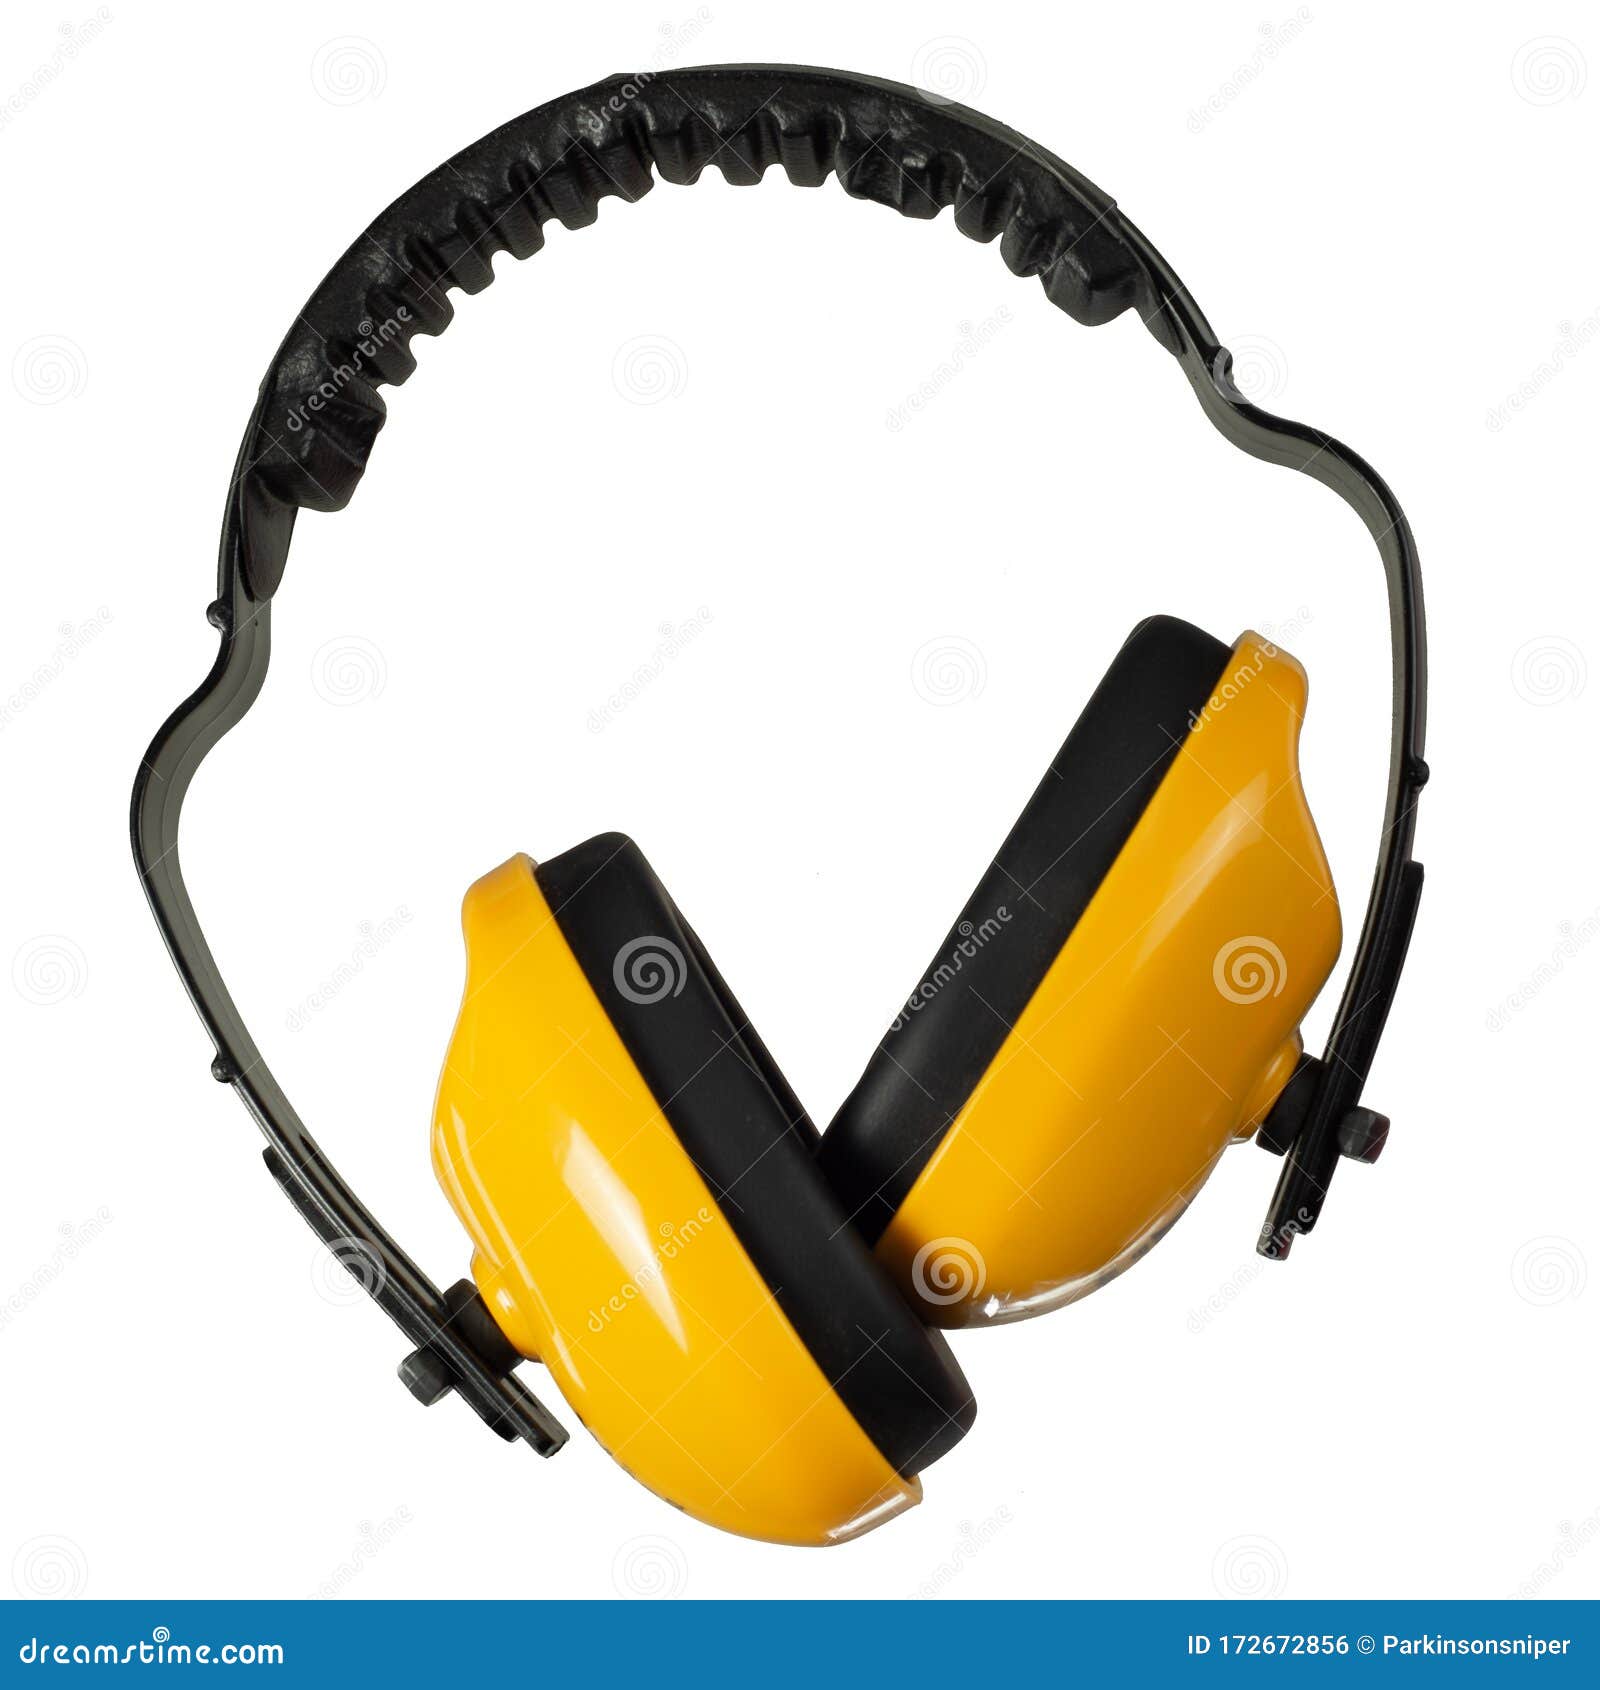 noise reduction ear muffs